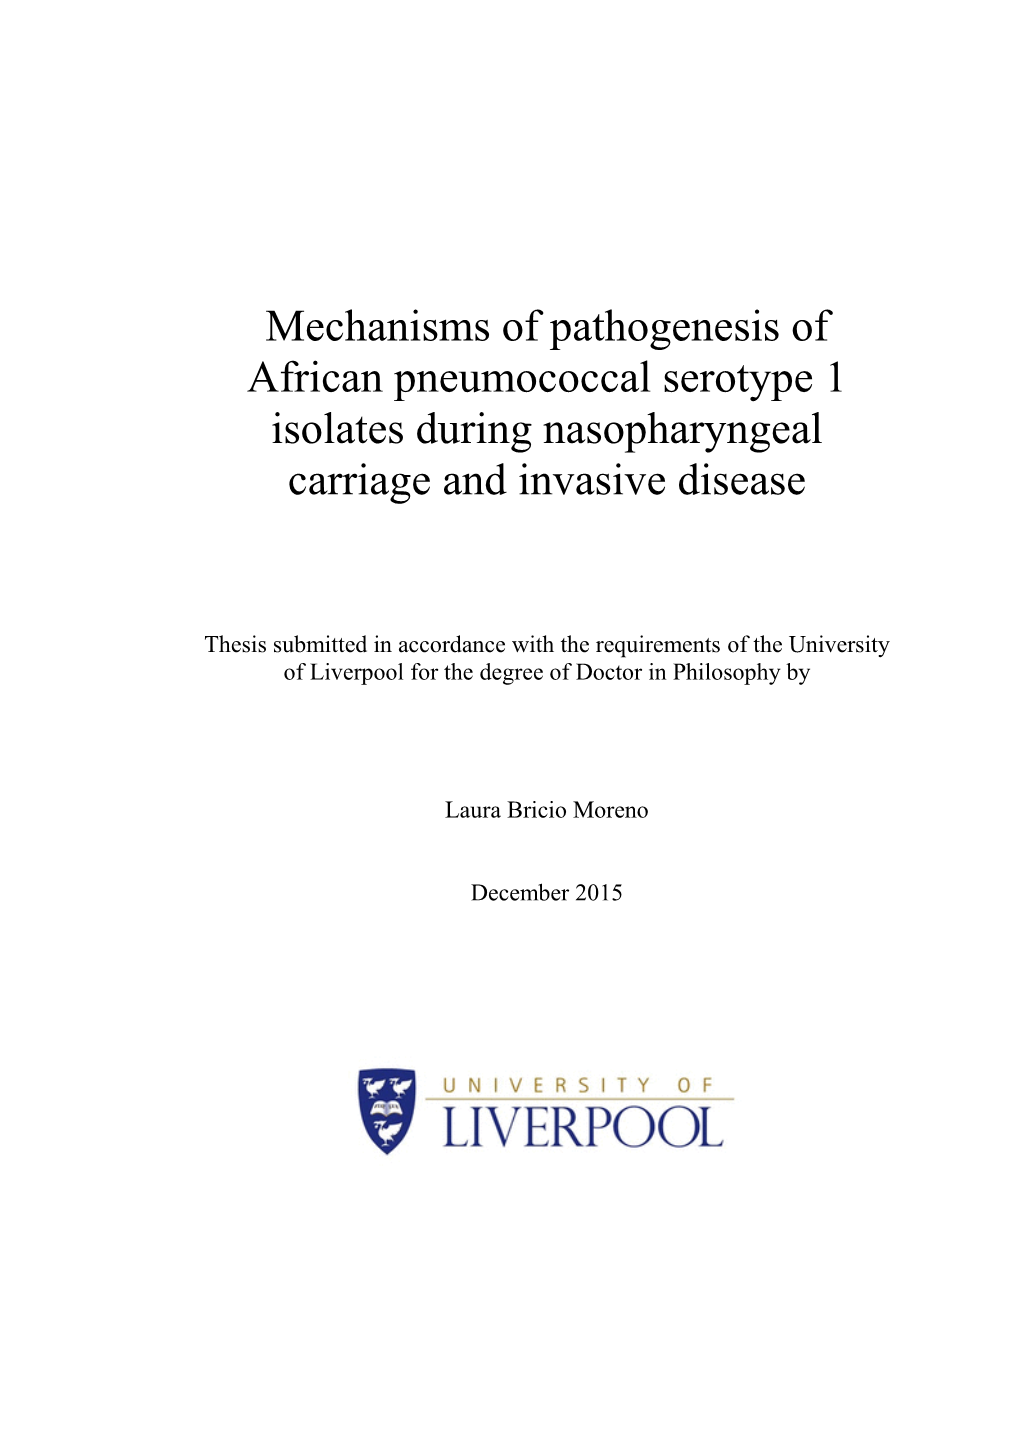 Mechanisms of Pathogenesis of African Pneumococcal Serotype 1 Isolates During Nasopharyngeal Carriage and Invasive Disease